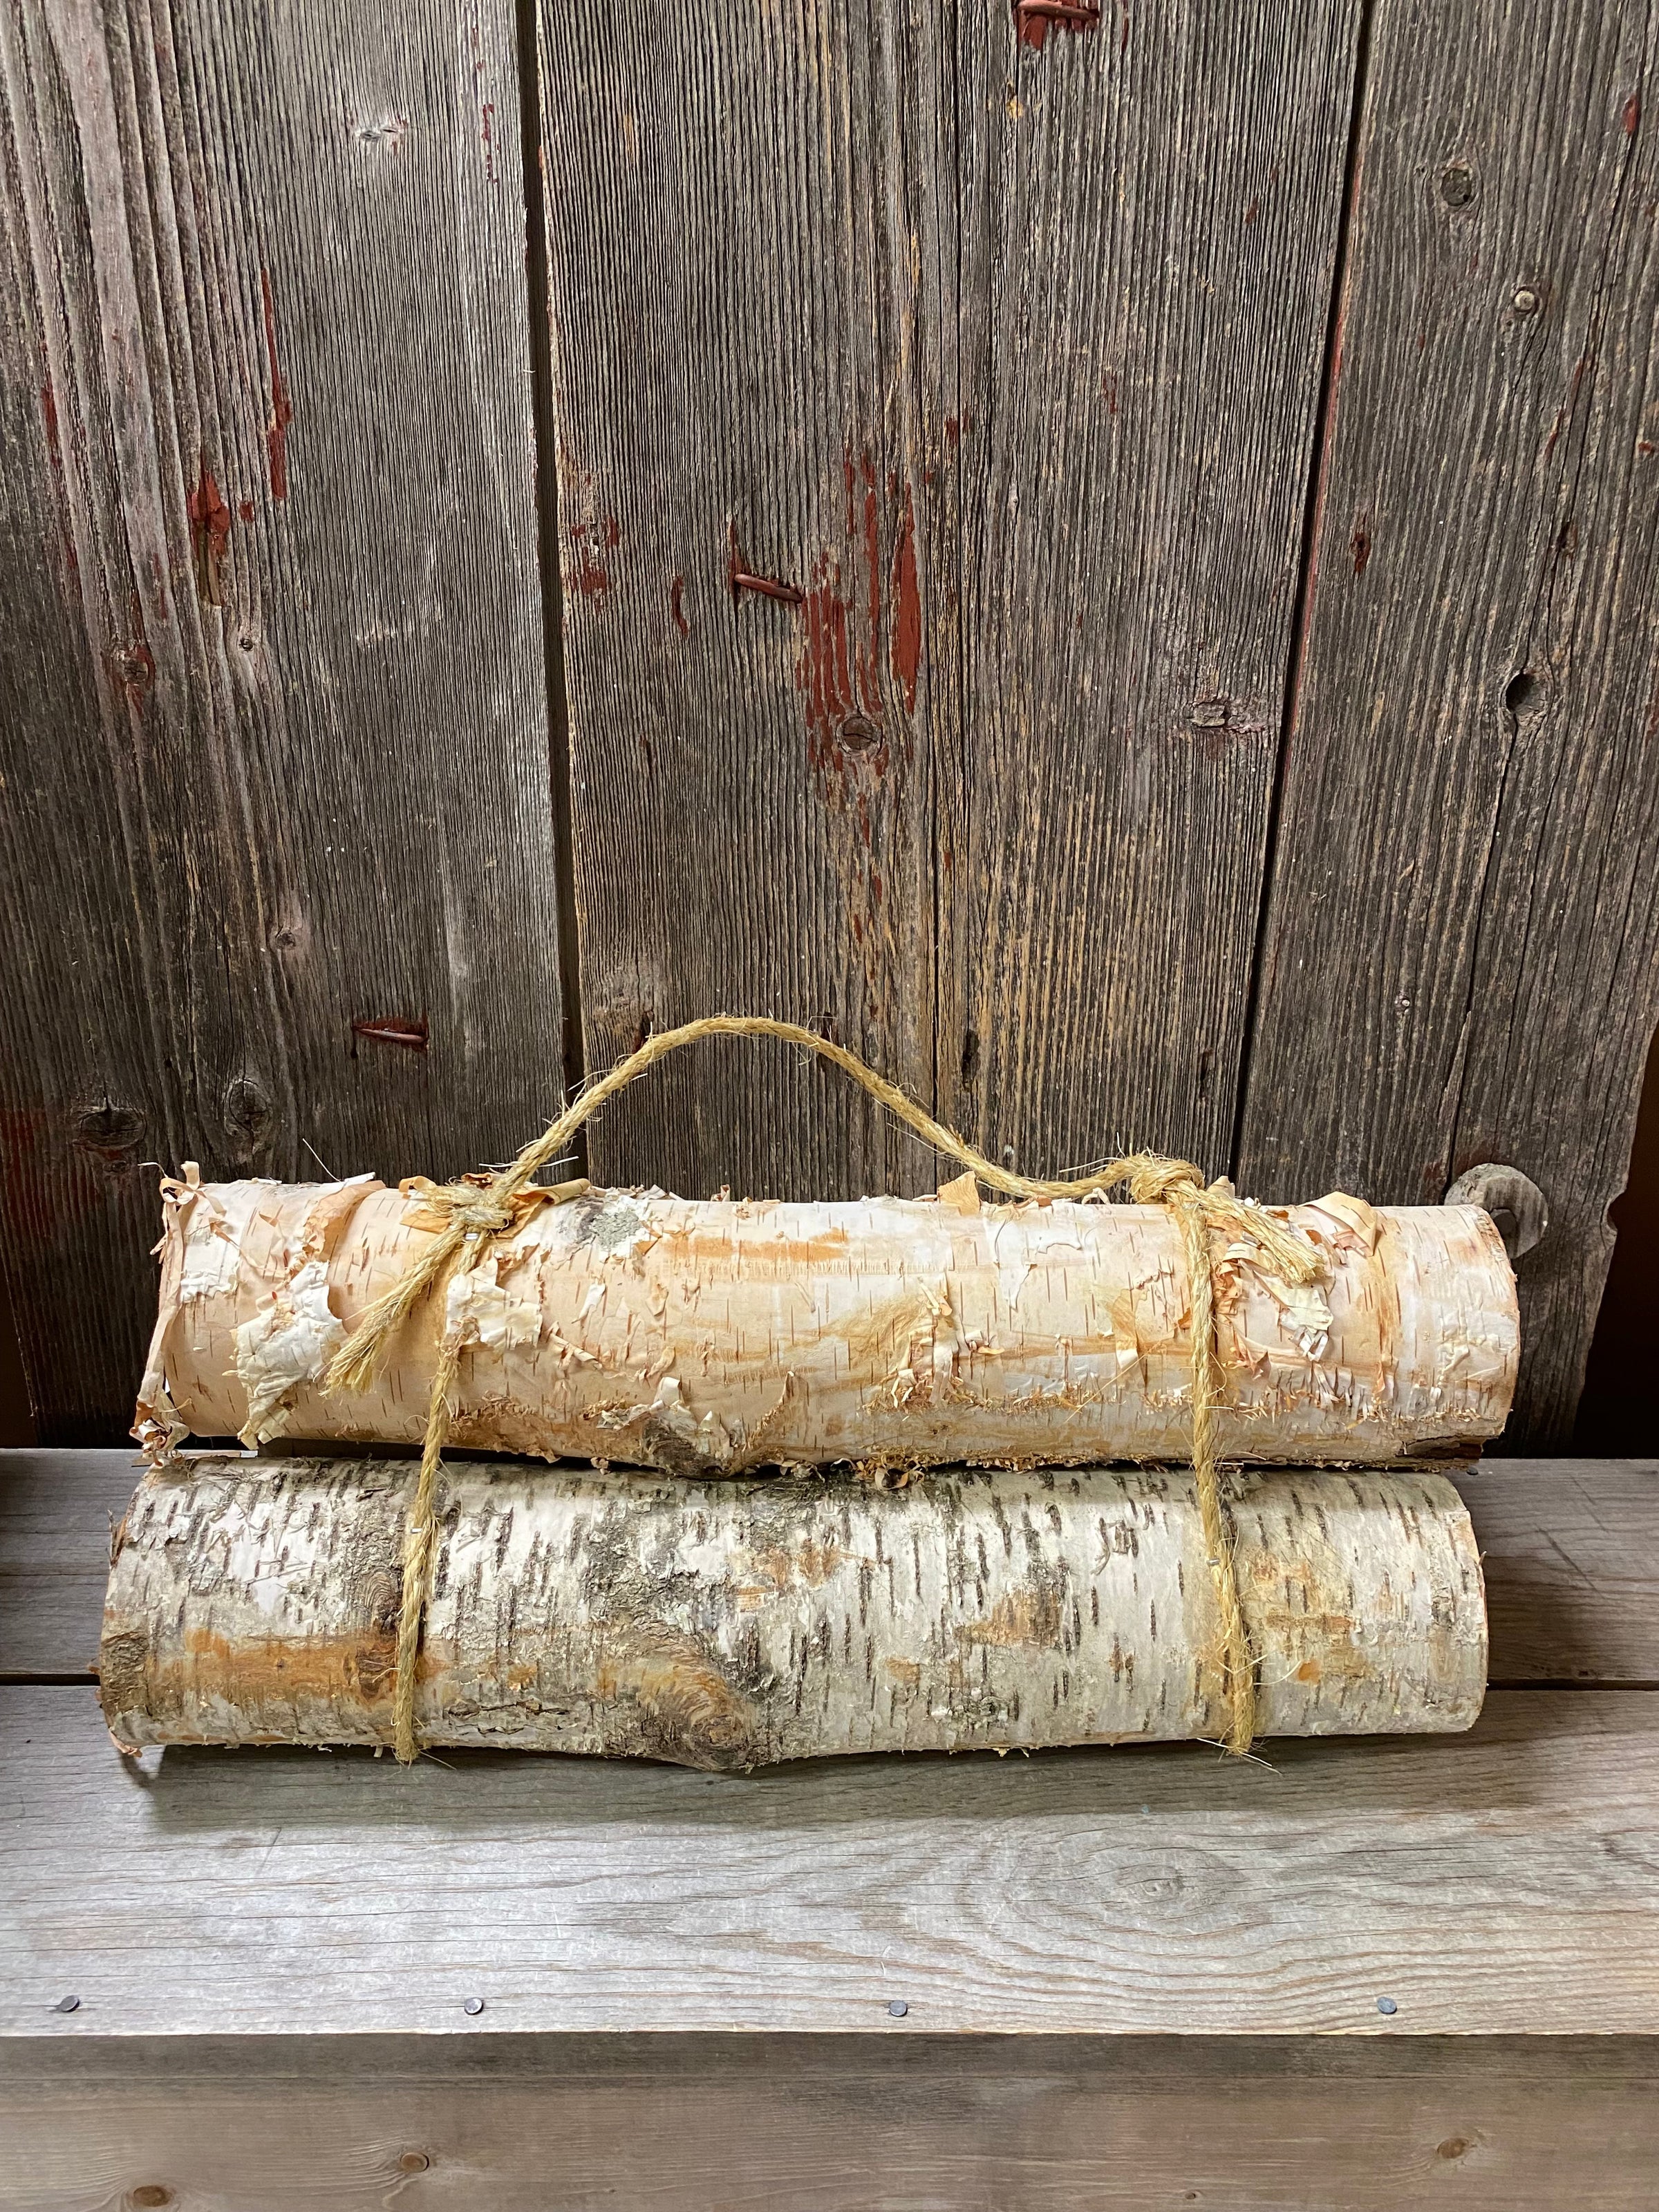 The Domestic Curator: How To Make Birch Wood Candles